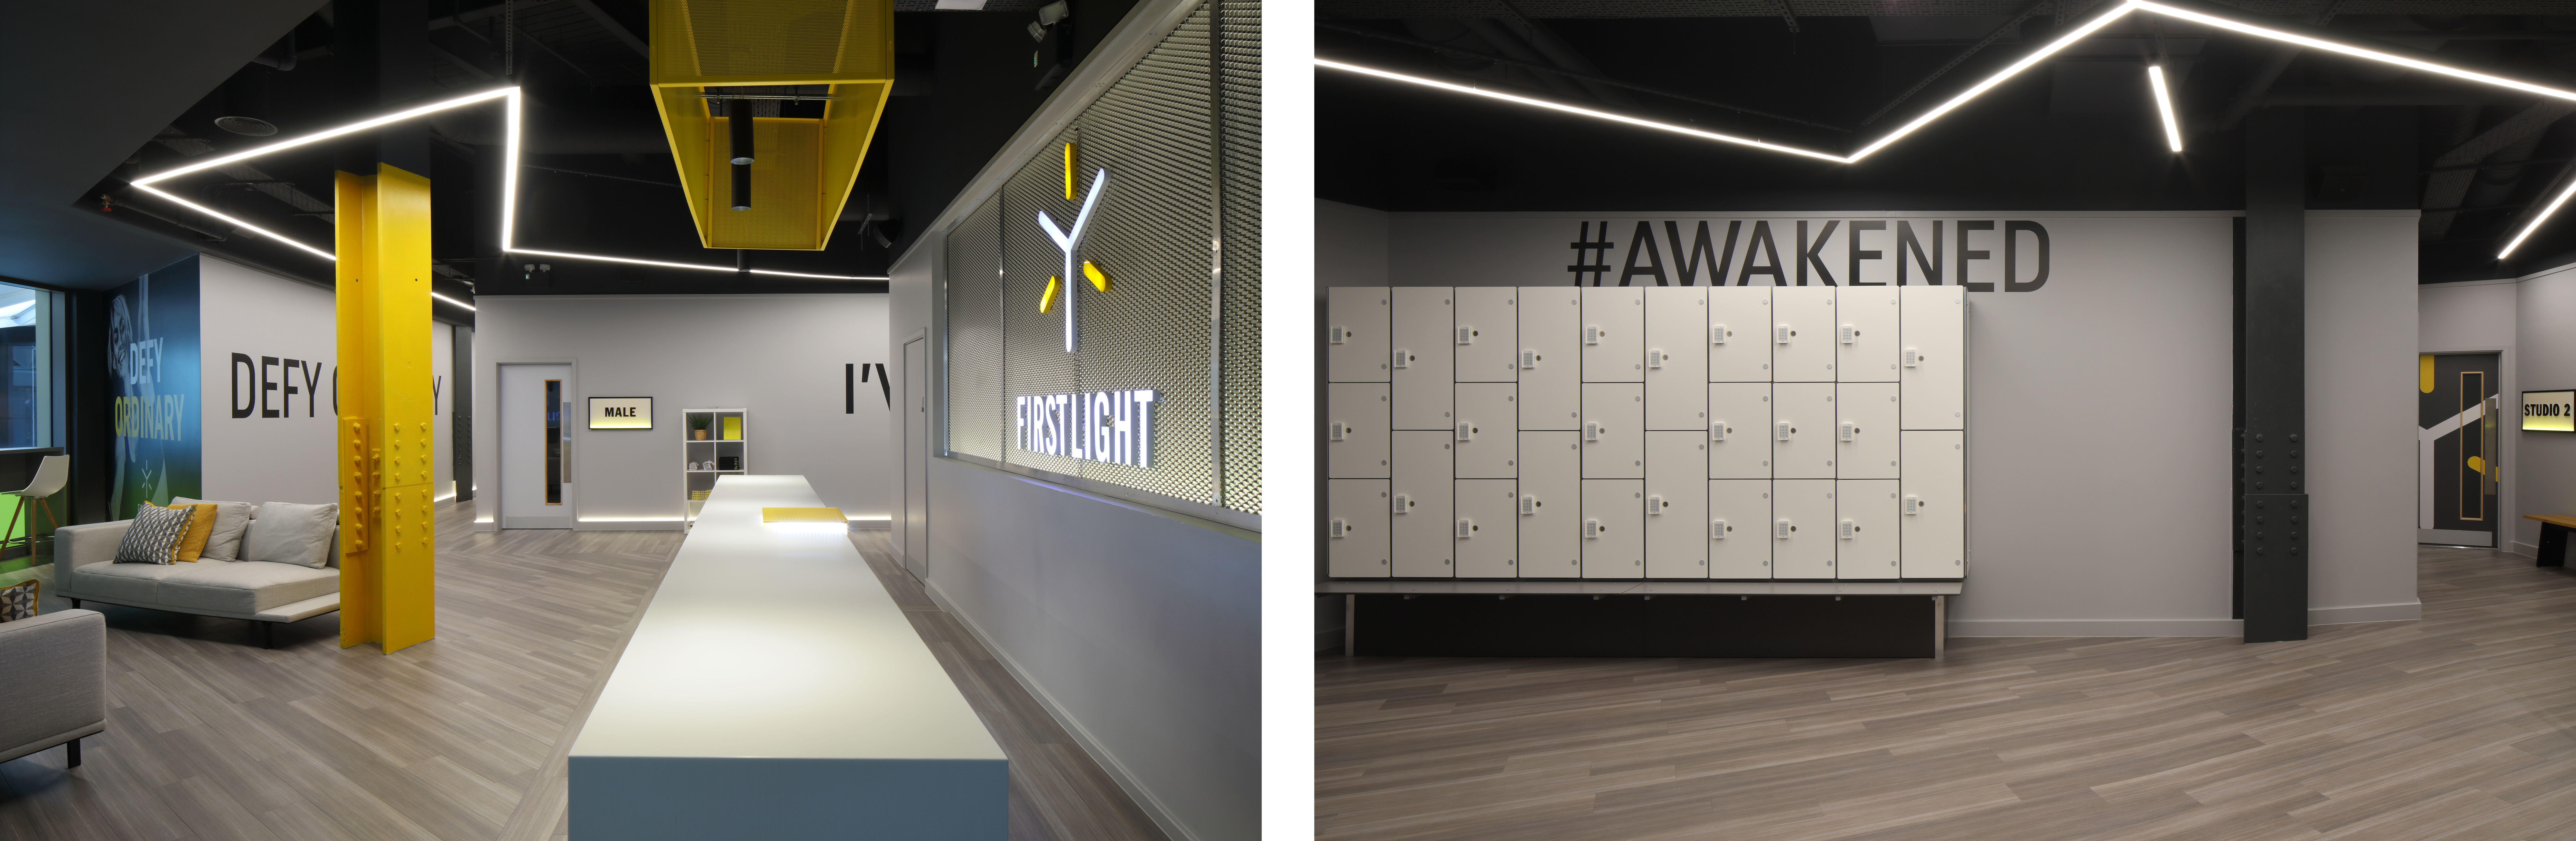 Architectural Linear Lighting at First Light Gym. Be creative with linear lighting.